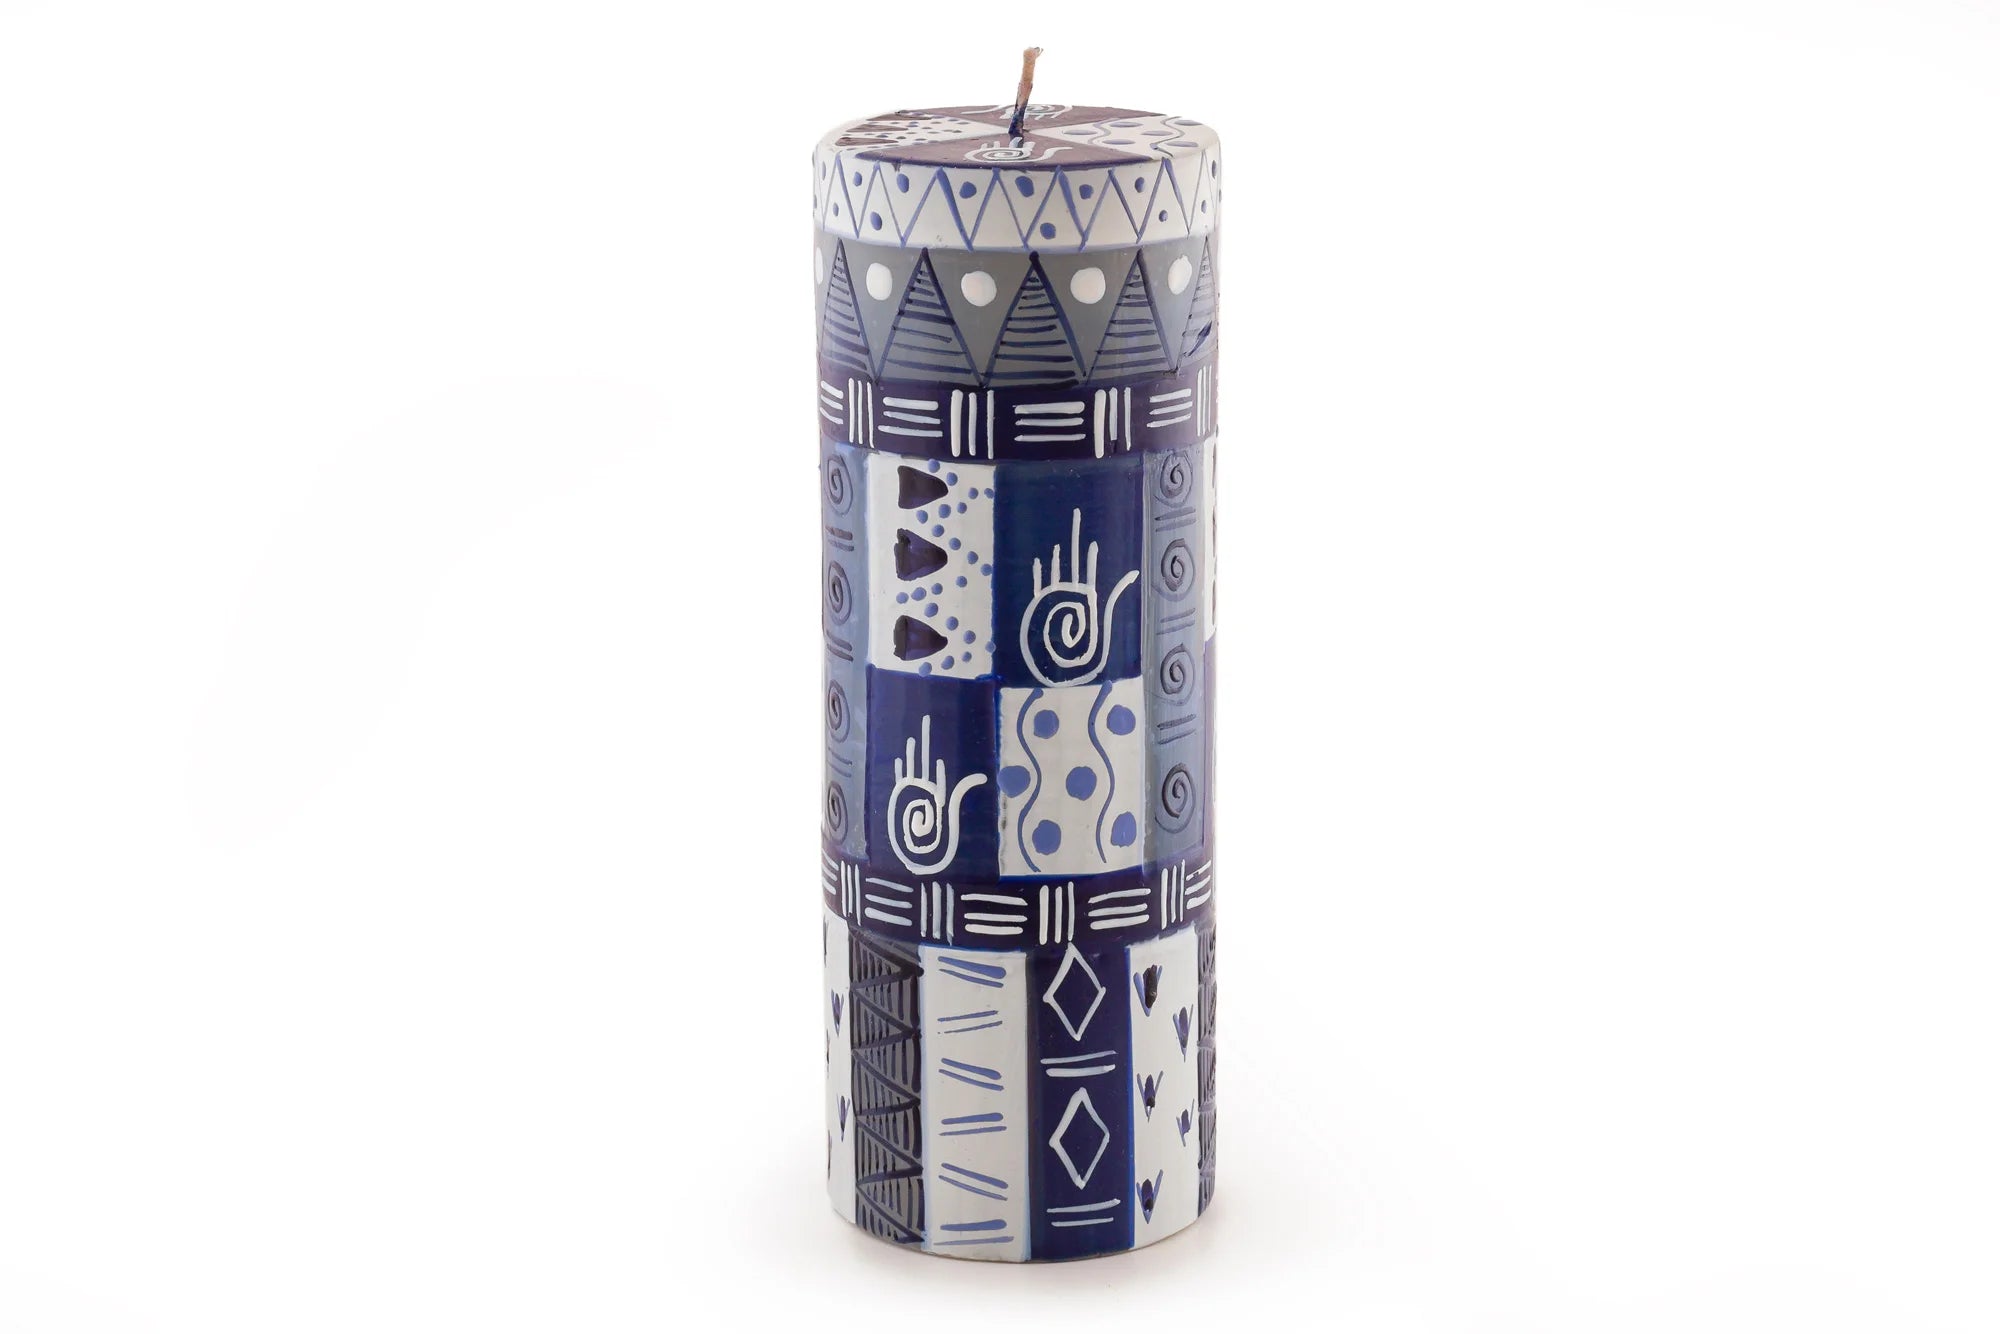 3" x 8" Hamsa pillar painted in blue & white geometric designs with the Hamsa Hand included in the design